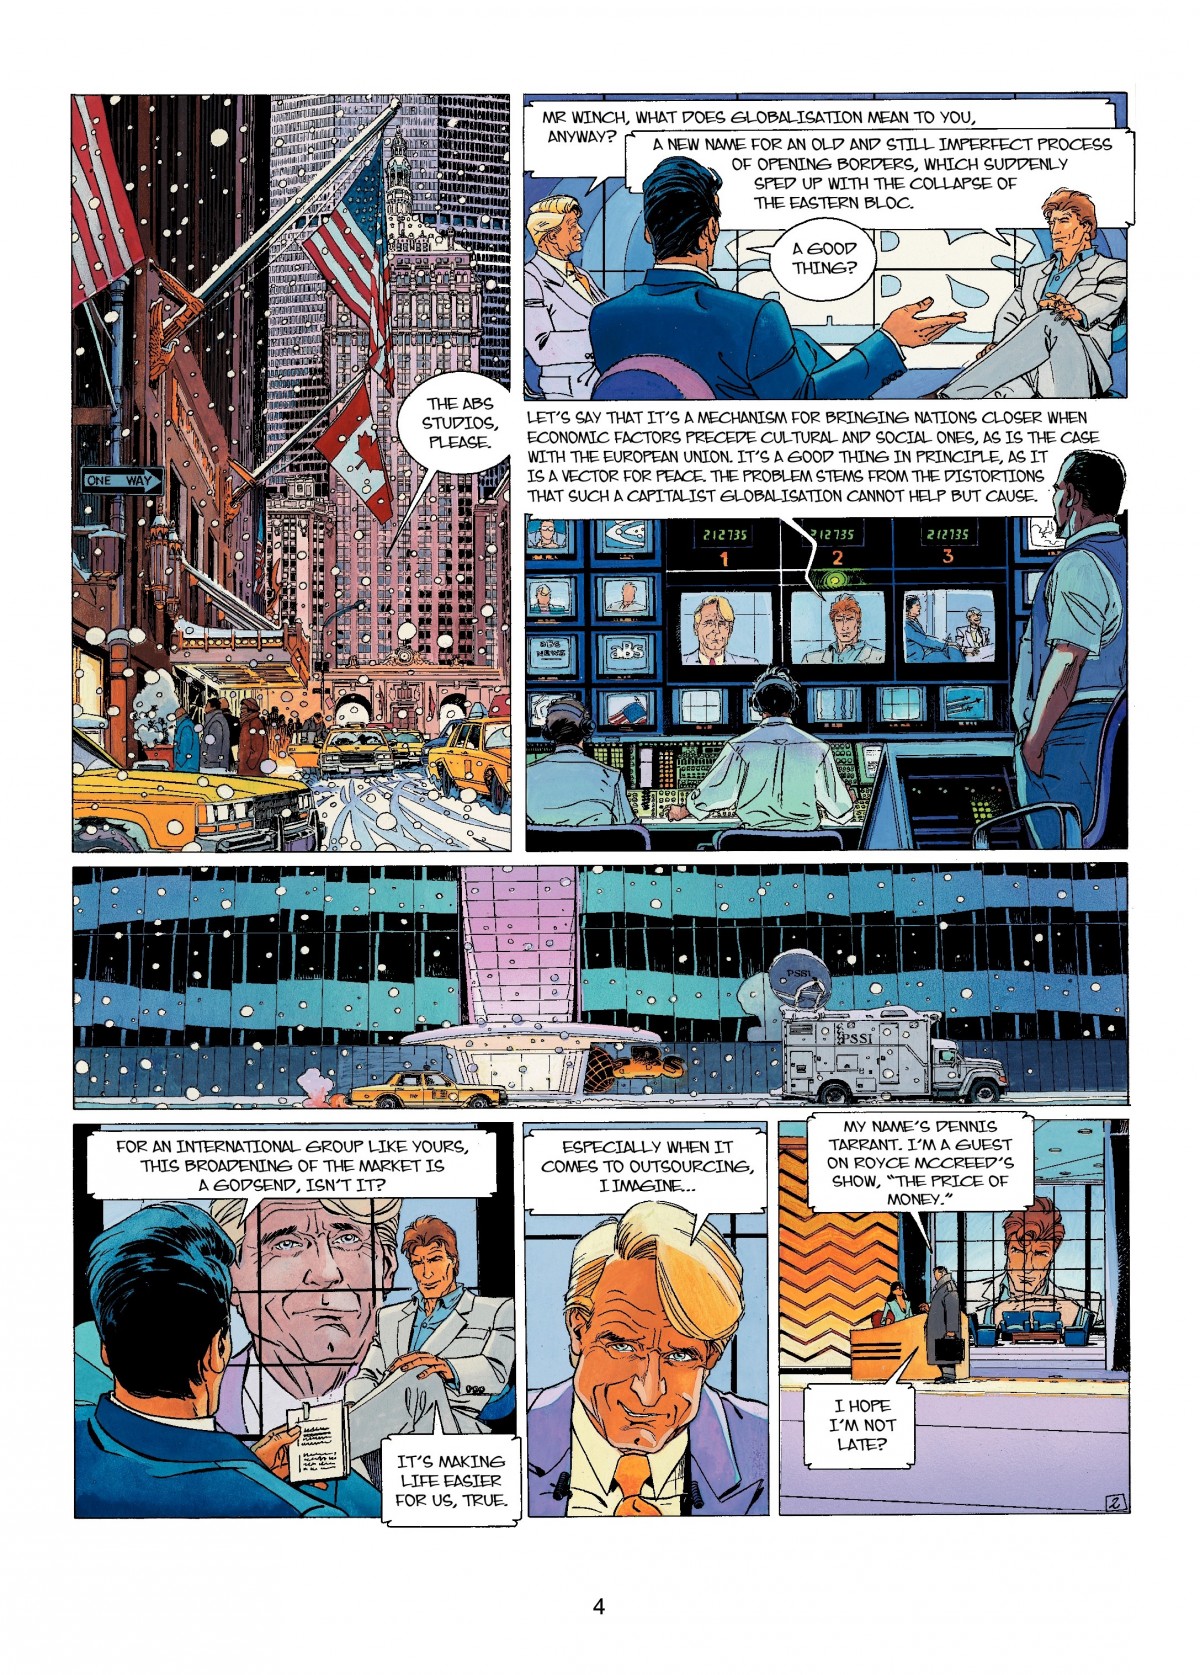 Largo Winch (1990-): Chapter 9 - Page 4